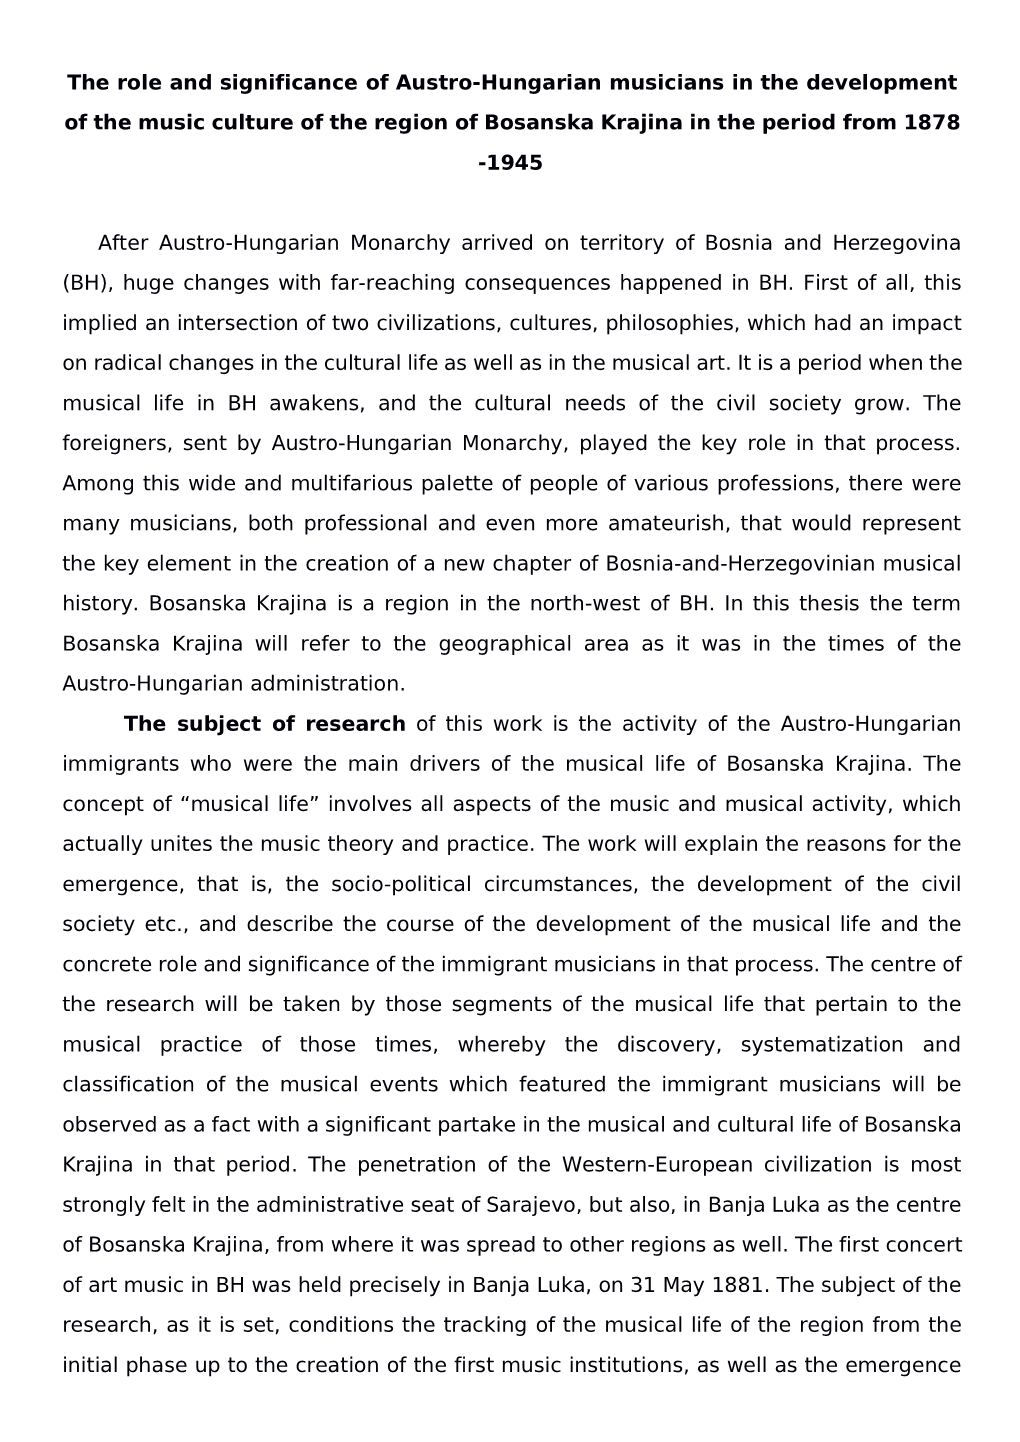 The Role and Significance of Austro-Hungarian Musicians in the Development of the Music Culture of the Region of Bosanska Krajina in the Period from 1878 -1945